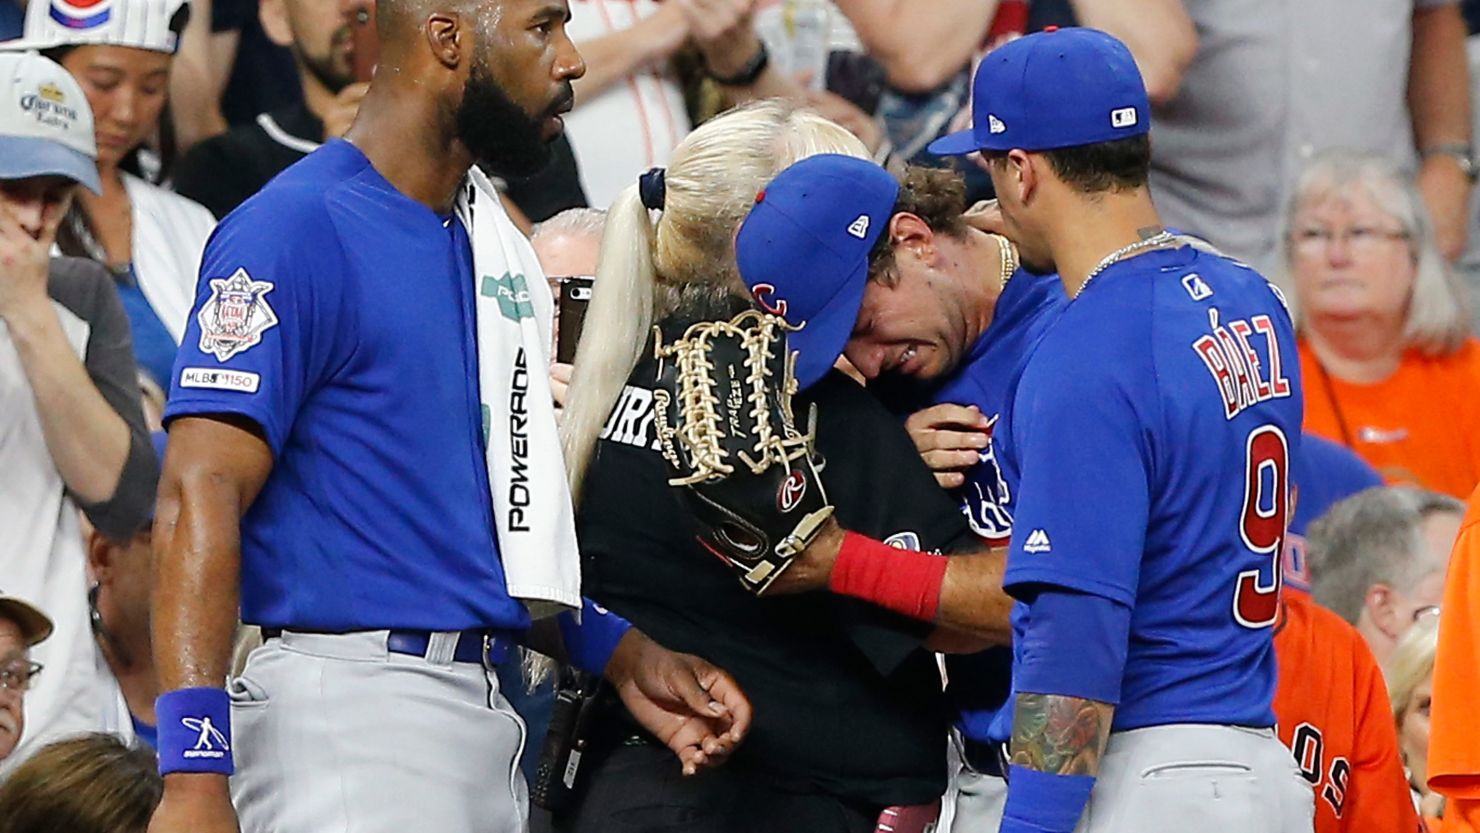 Cubs outfielder Albert Almora Jr., flanked by teammates Jason Heyward and Javier Baez, is comforted by a security guard after a child was struck by a line drive during a Cubs-Astros game Wednesday.